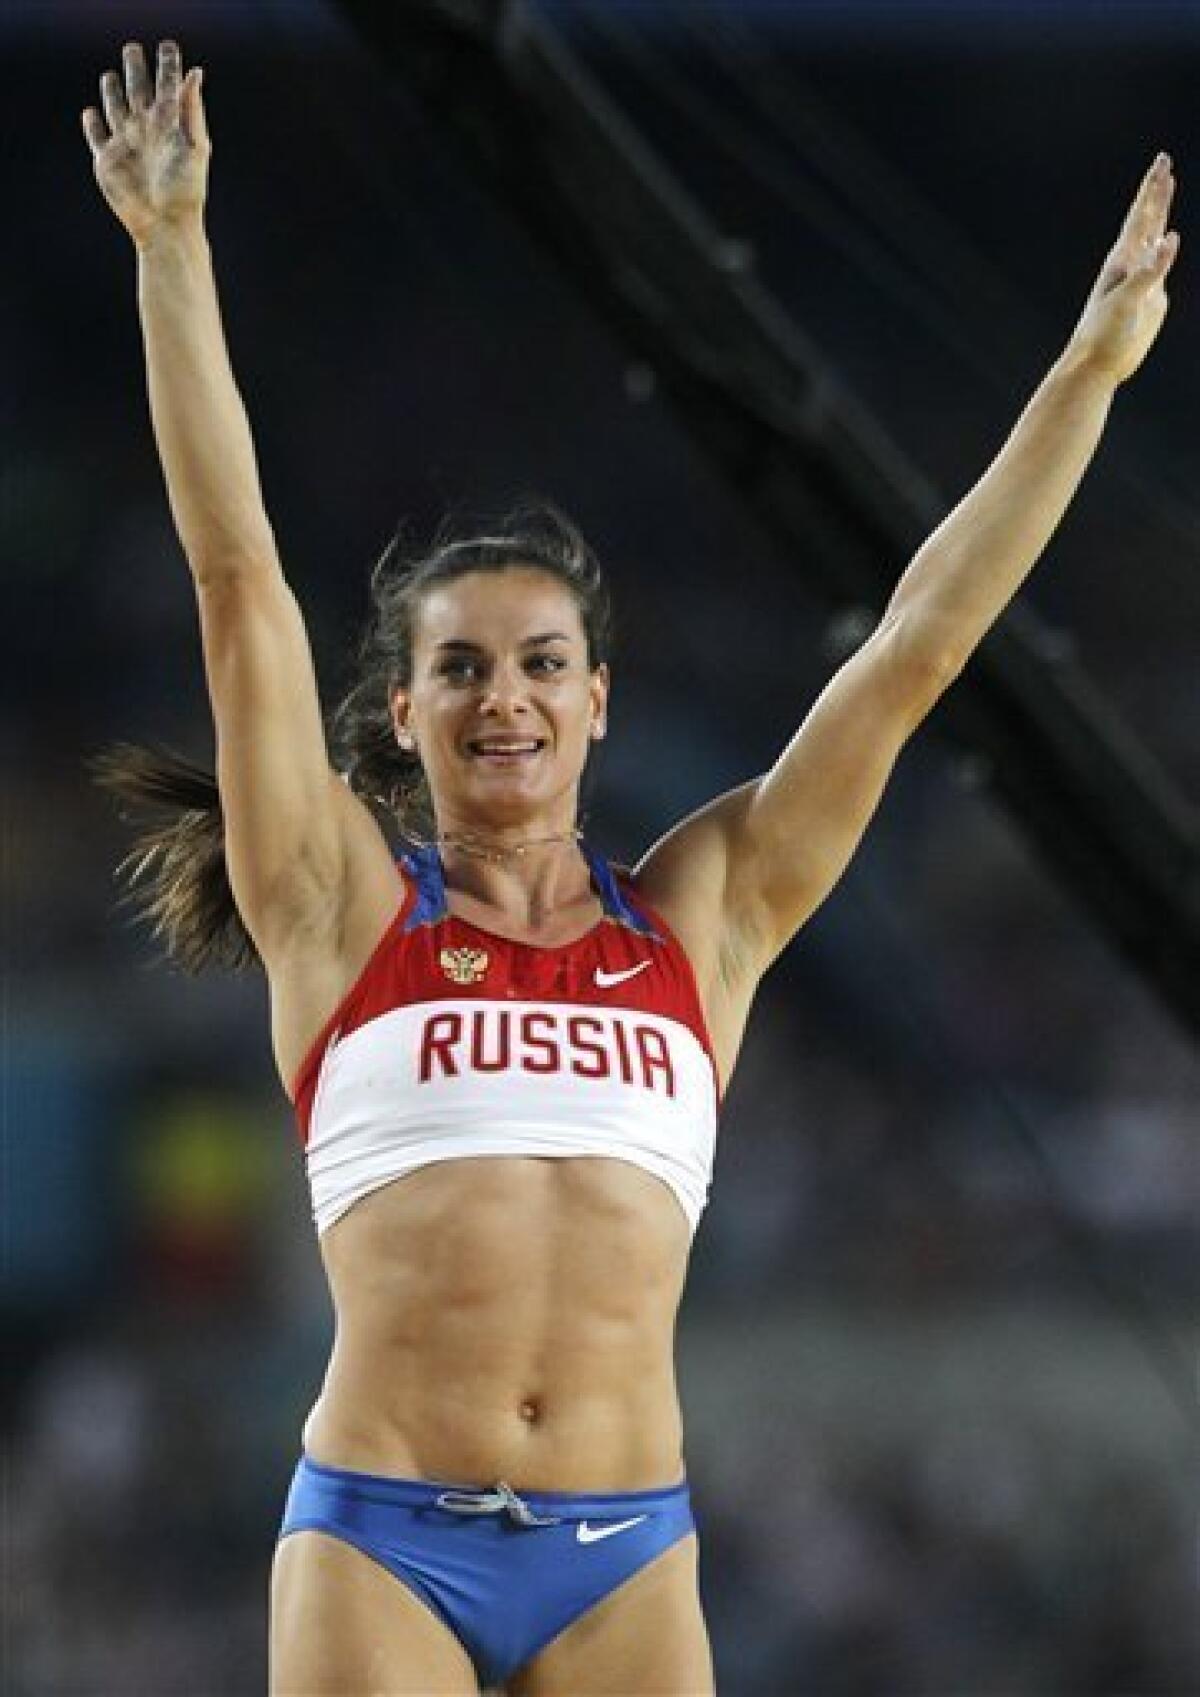 Russia's Yelena Isinbayeva reacts after clearing the bar in the Women's Pole Vault final at the World Athletics Championships in Daegu, South Korea, Tuesday, Aug. 30, 2011. (AP Photo/Kin Cheung)